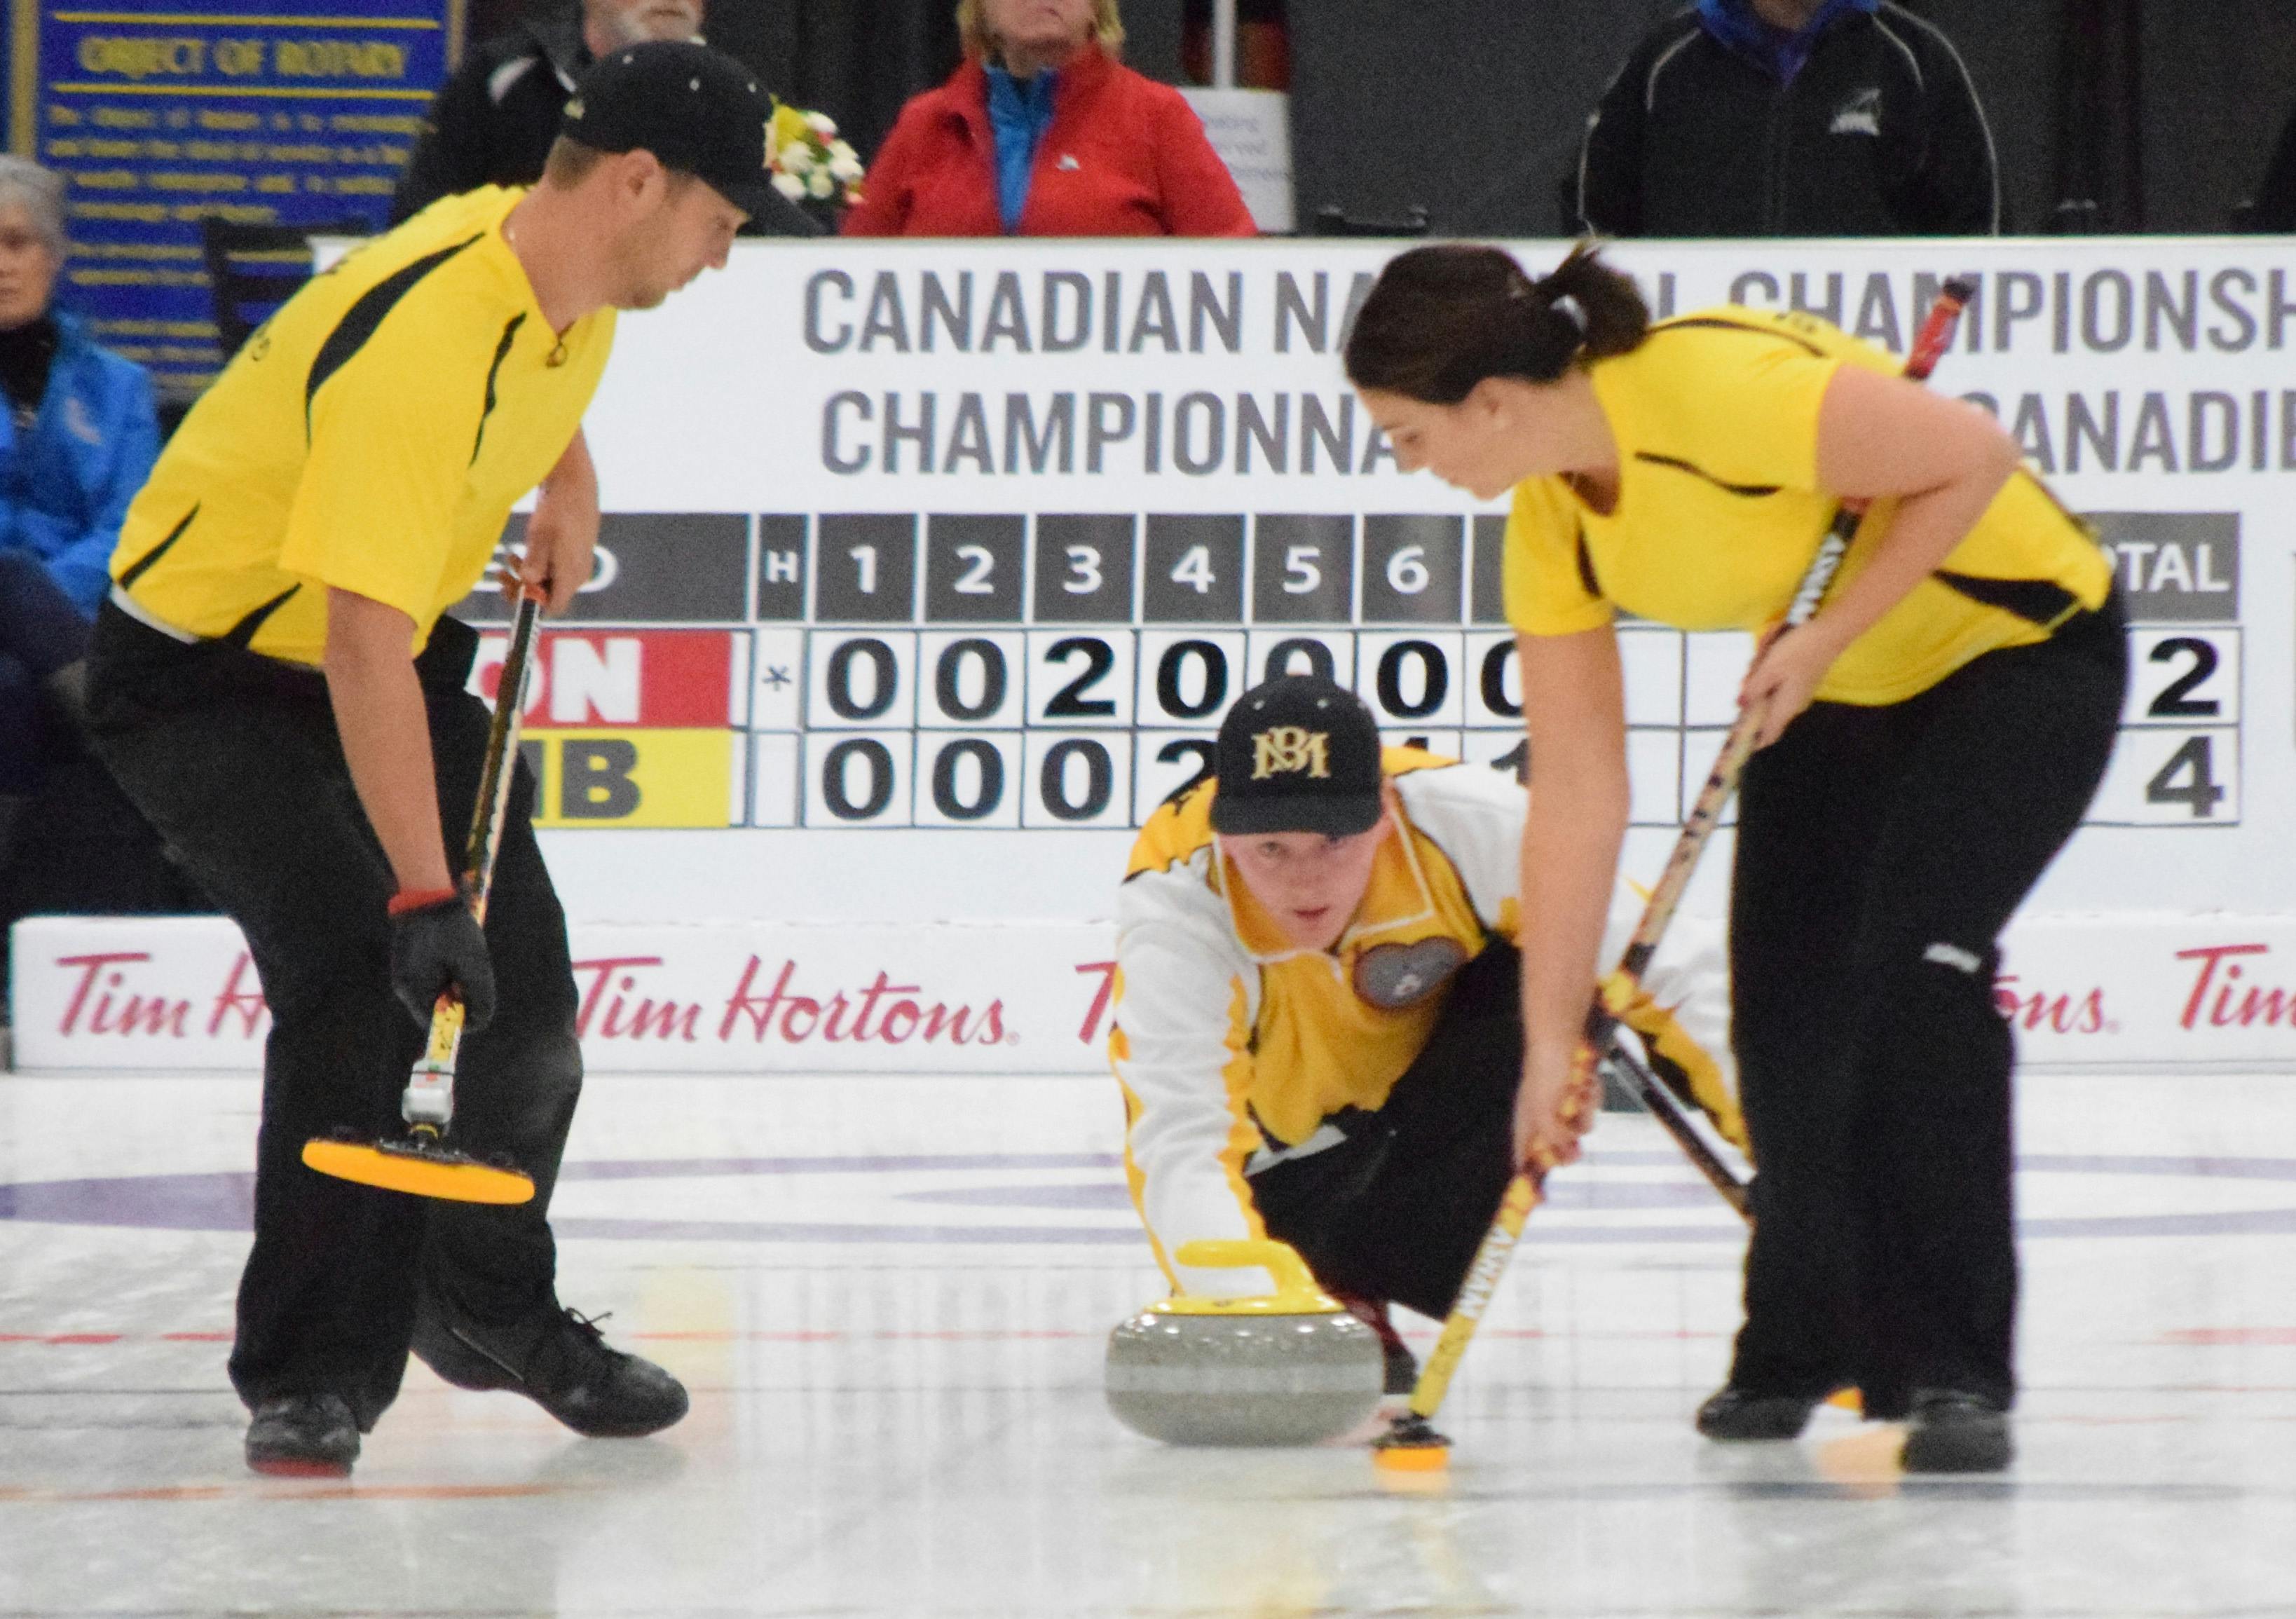 Stage being set for upcoming Canadian Senior Curling Championships in Yarmouth SaltWire